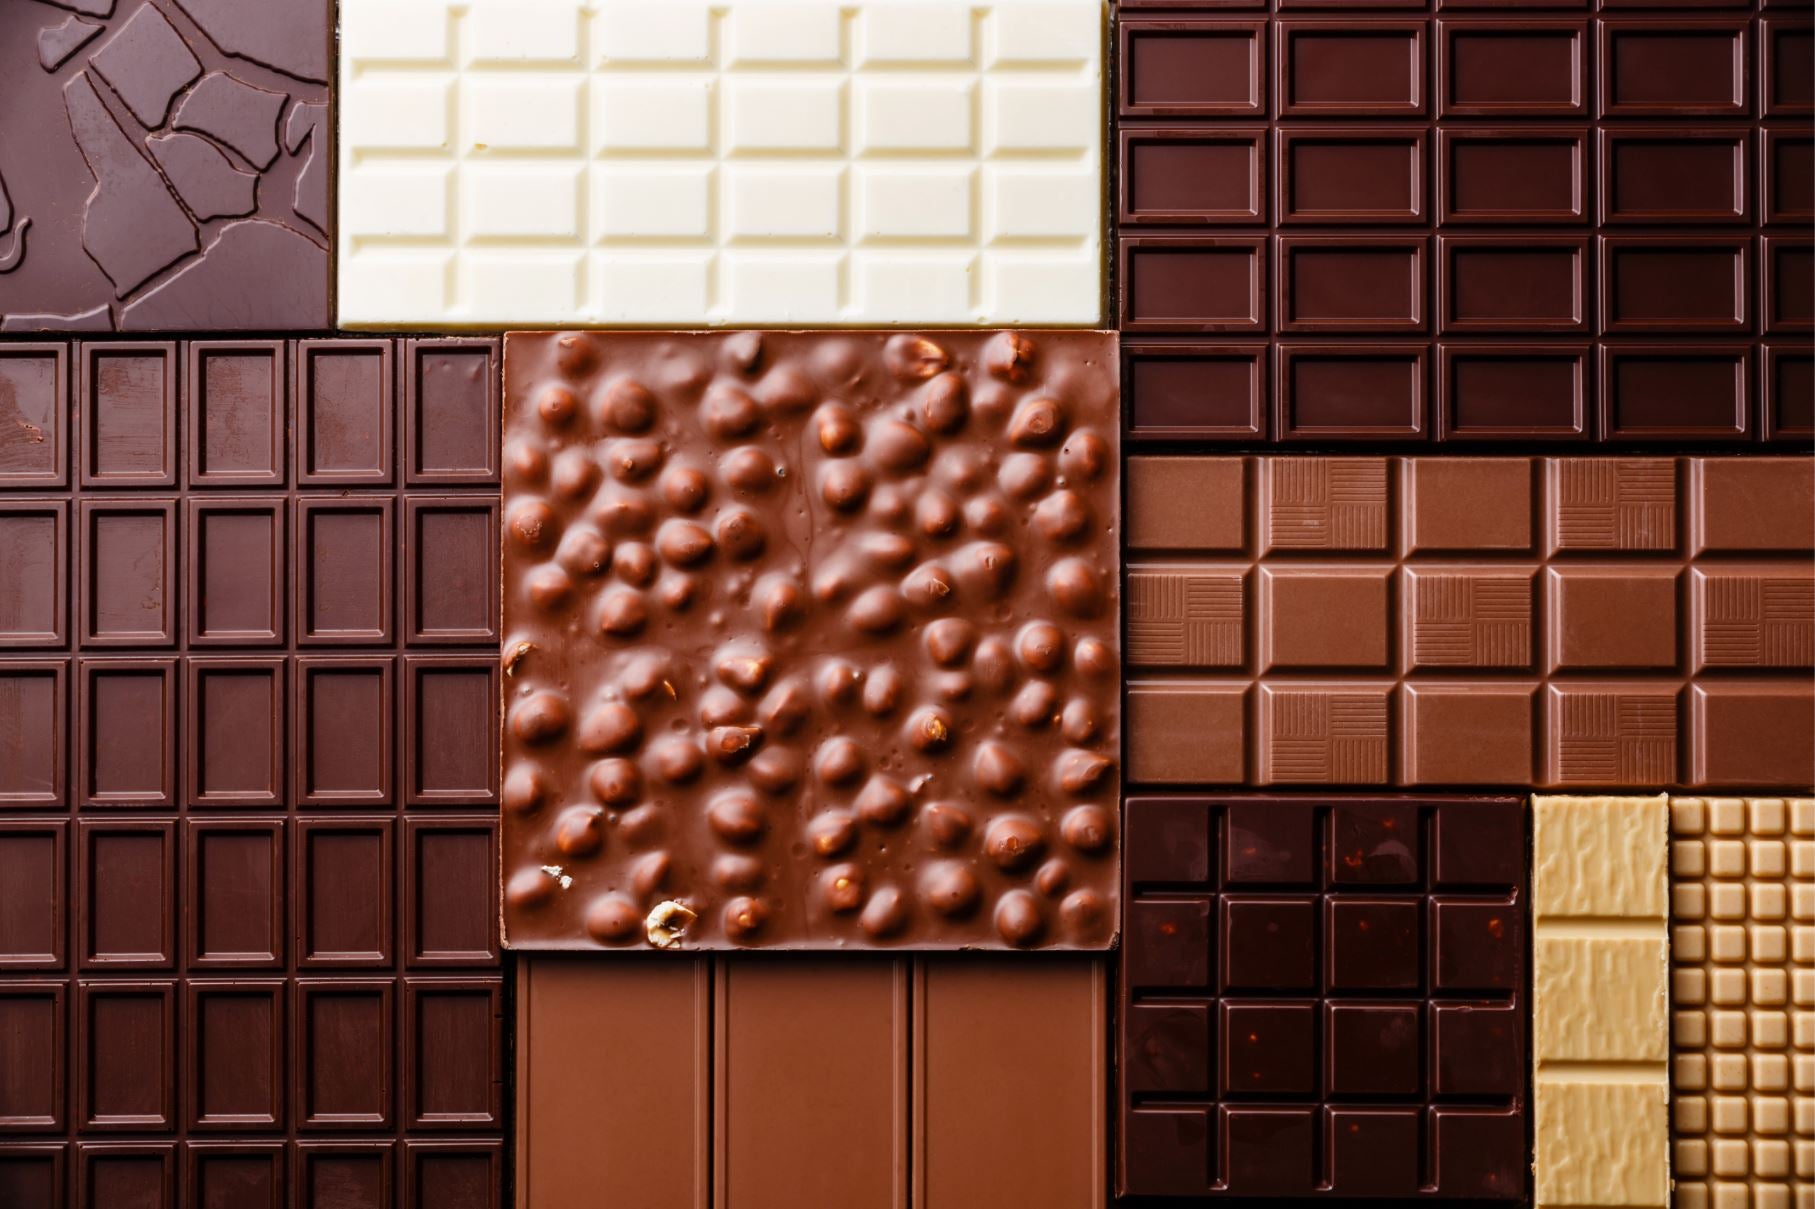 The History of Chocolate (and other cool facts!)